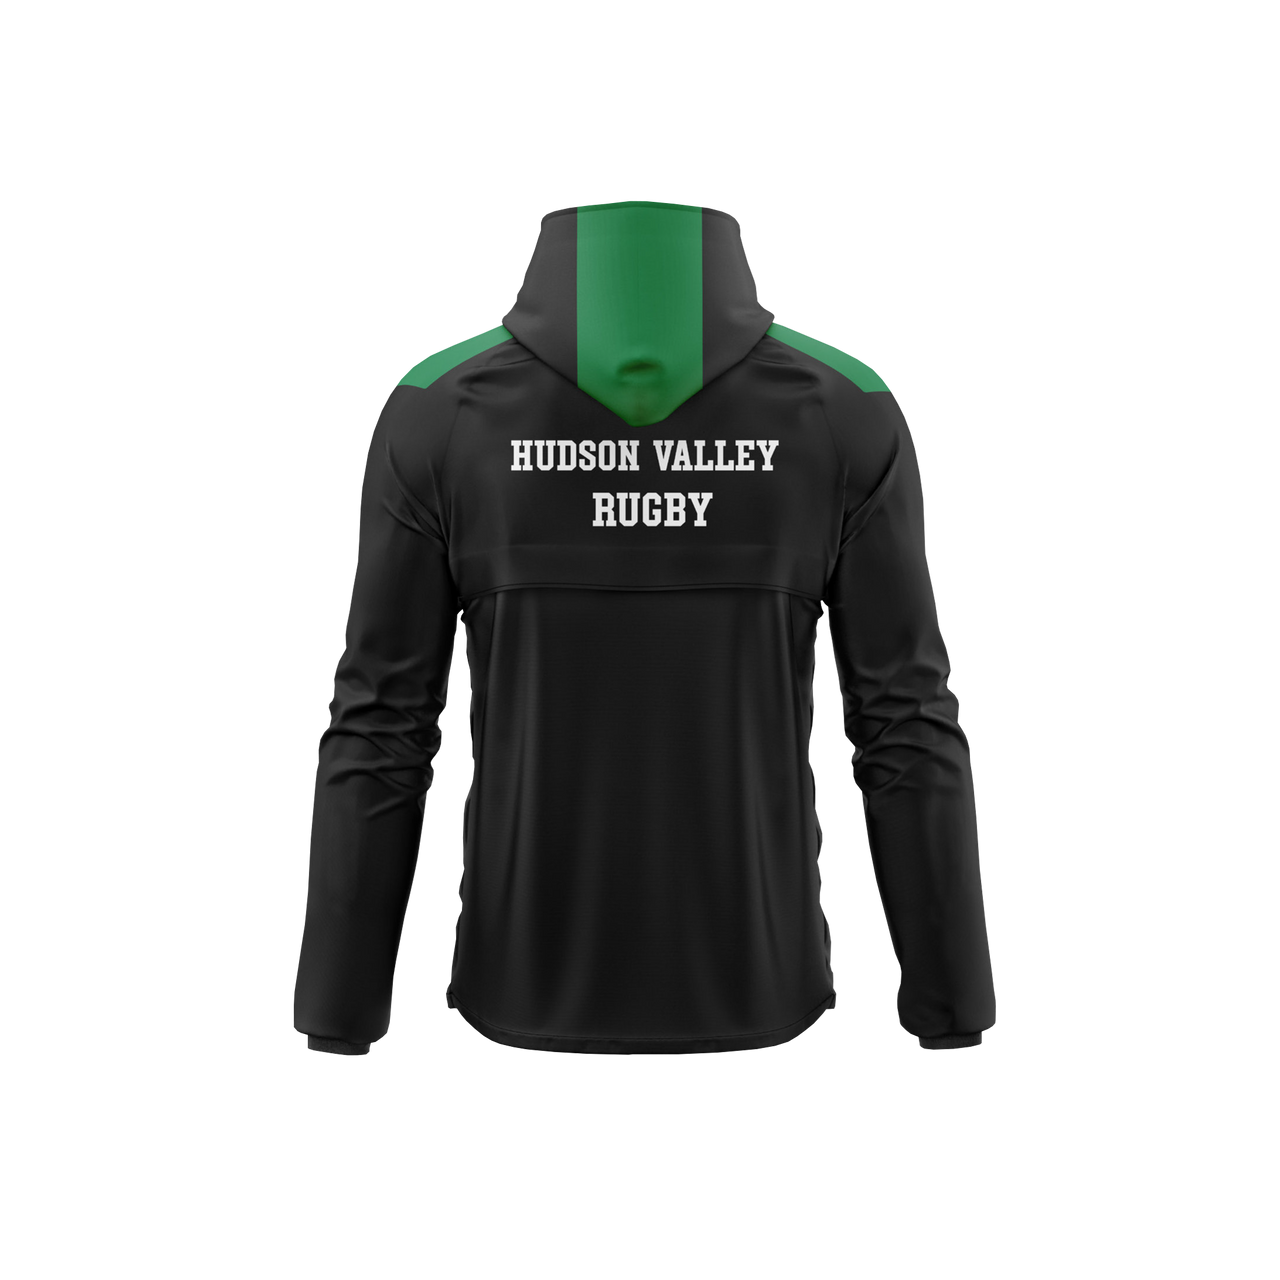 Hudson Valley Rugby Warm Up Jacket